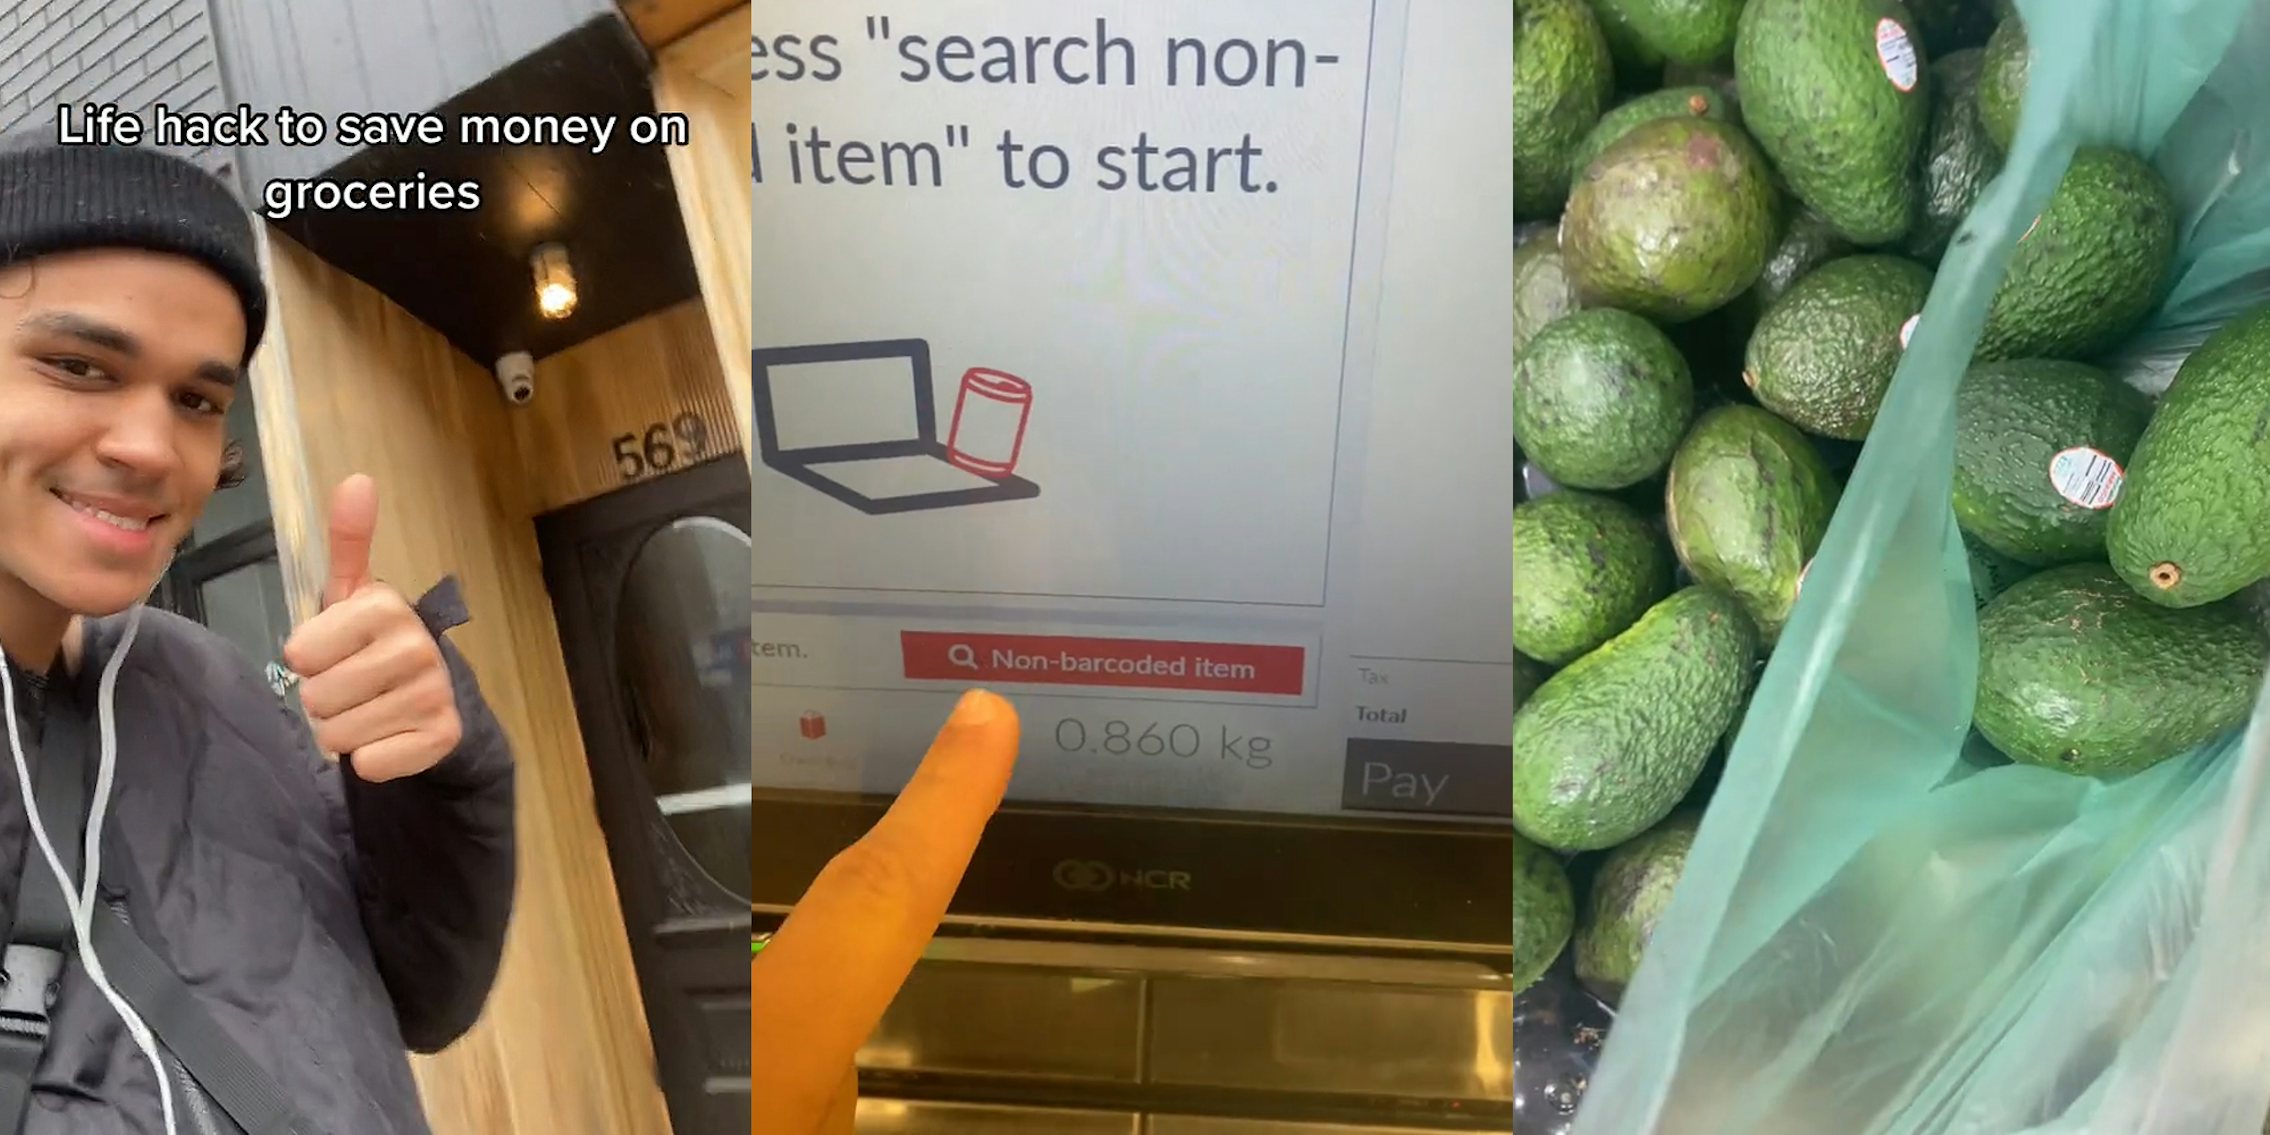 man walking outside with thumbs up caption 'Life hack to save on groceries' (l) man finger on self checkout screen 'Non-barcoded item' (c) bag of avocados (r)